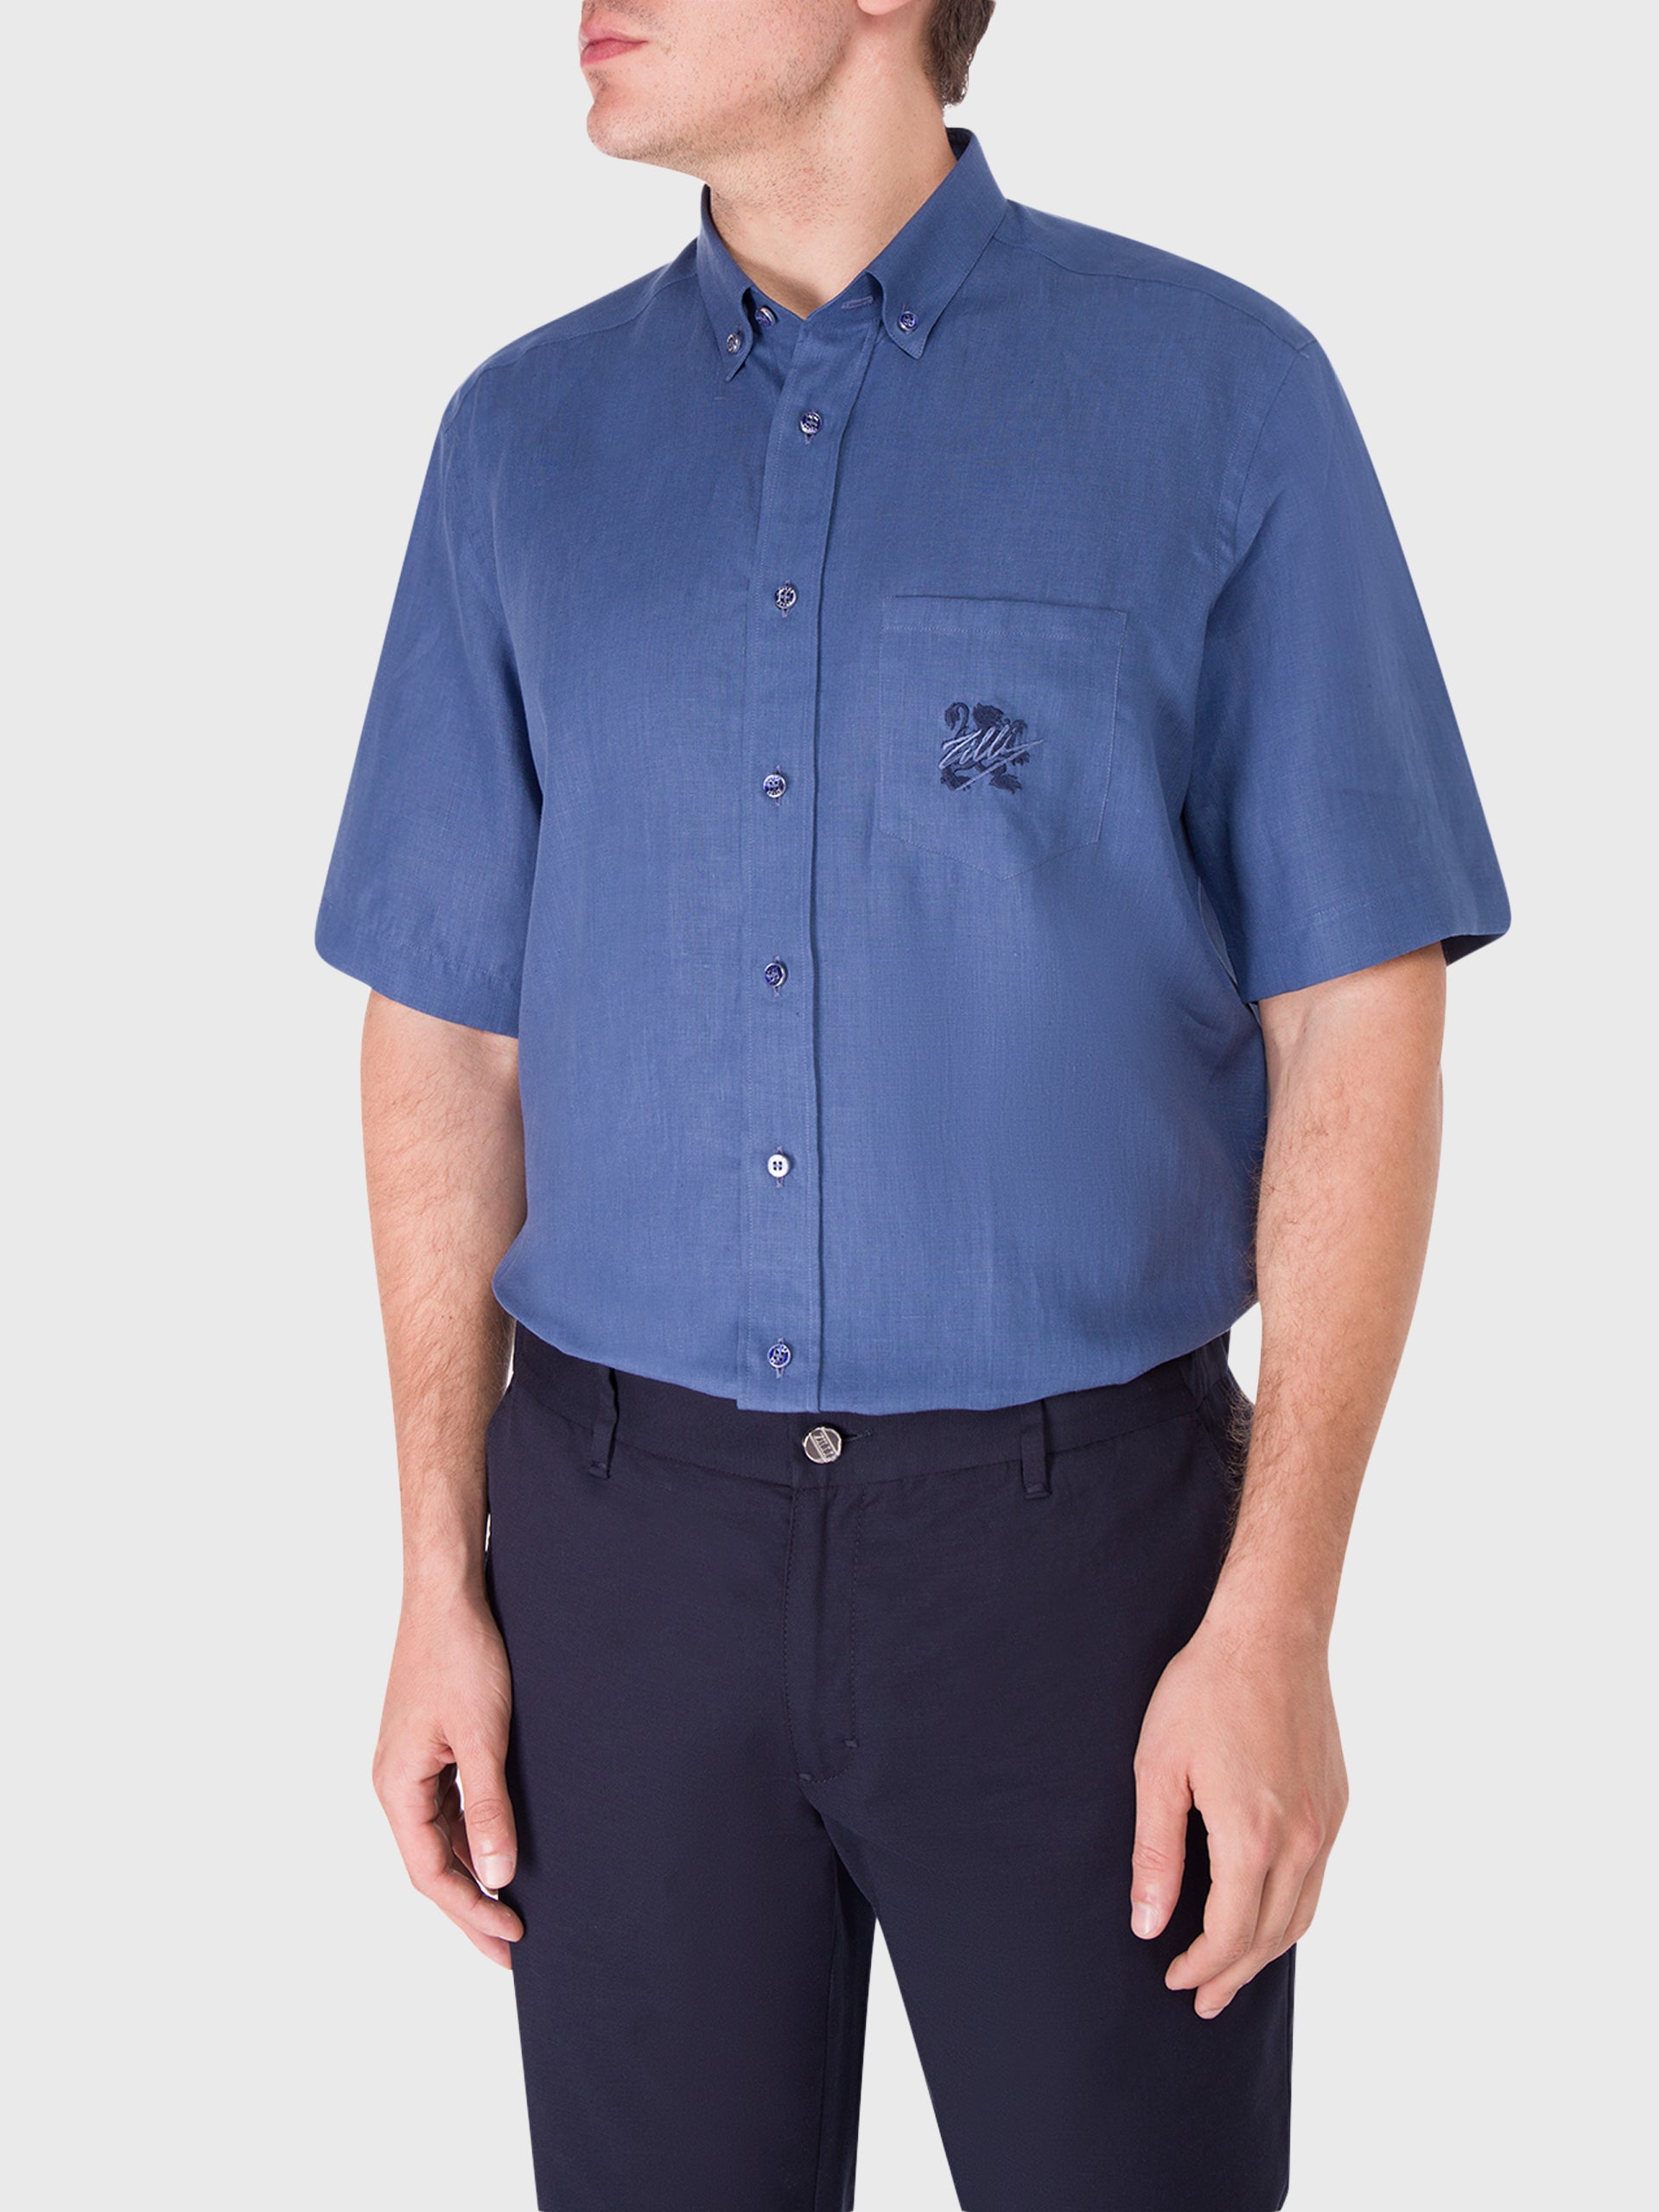 Short Sleeve Shirt with Signature Embroidery